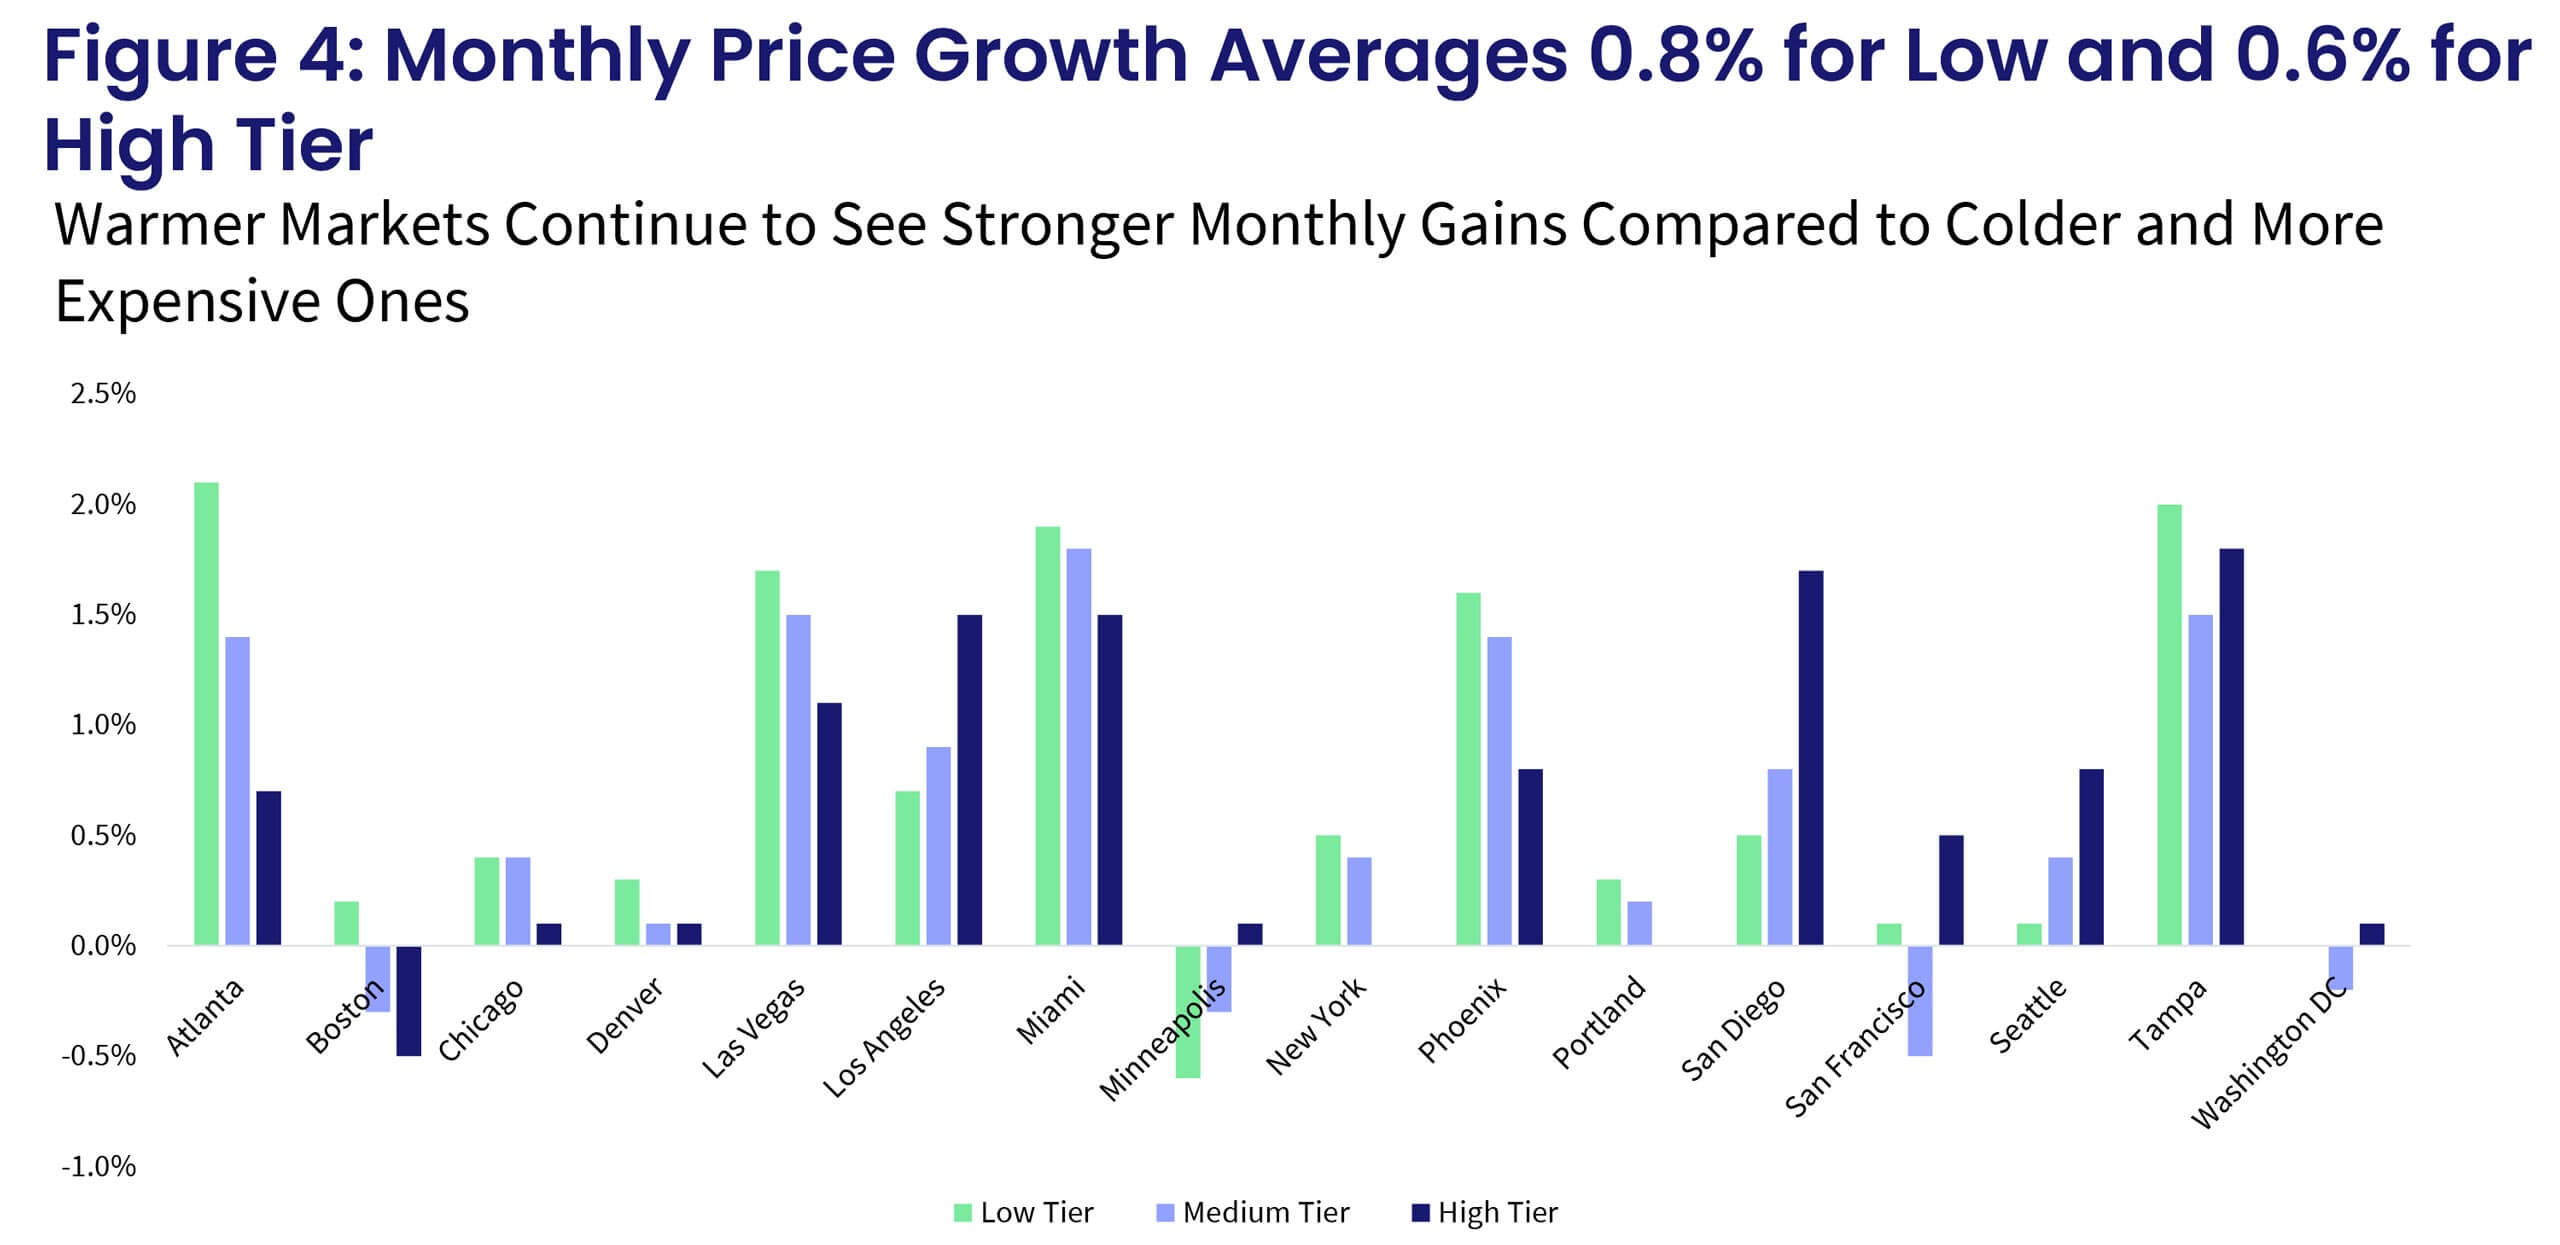 Figure 4: Monthly Price Growth Averages 0.8% for Low and 0.6% for High Tier